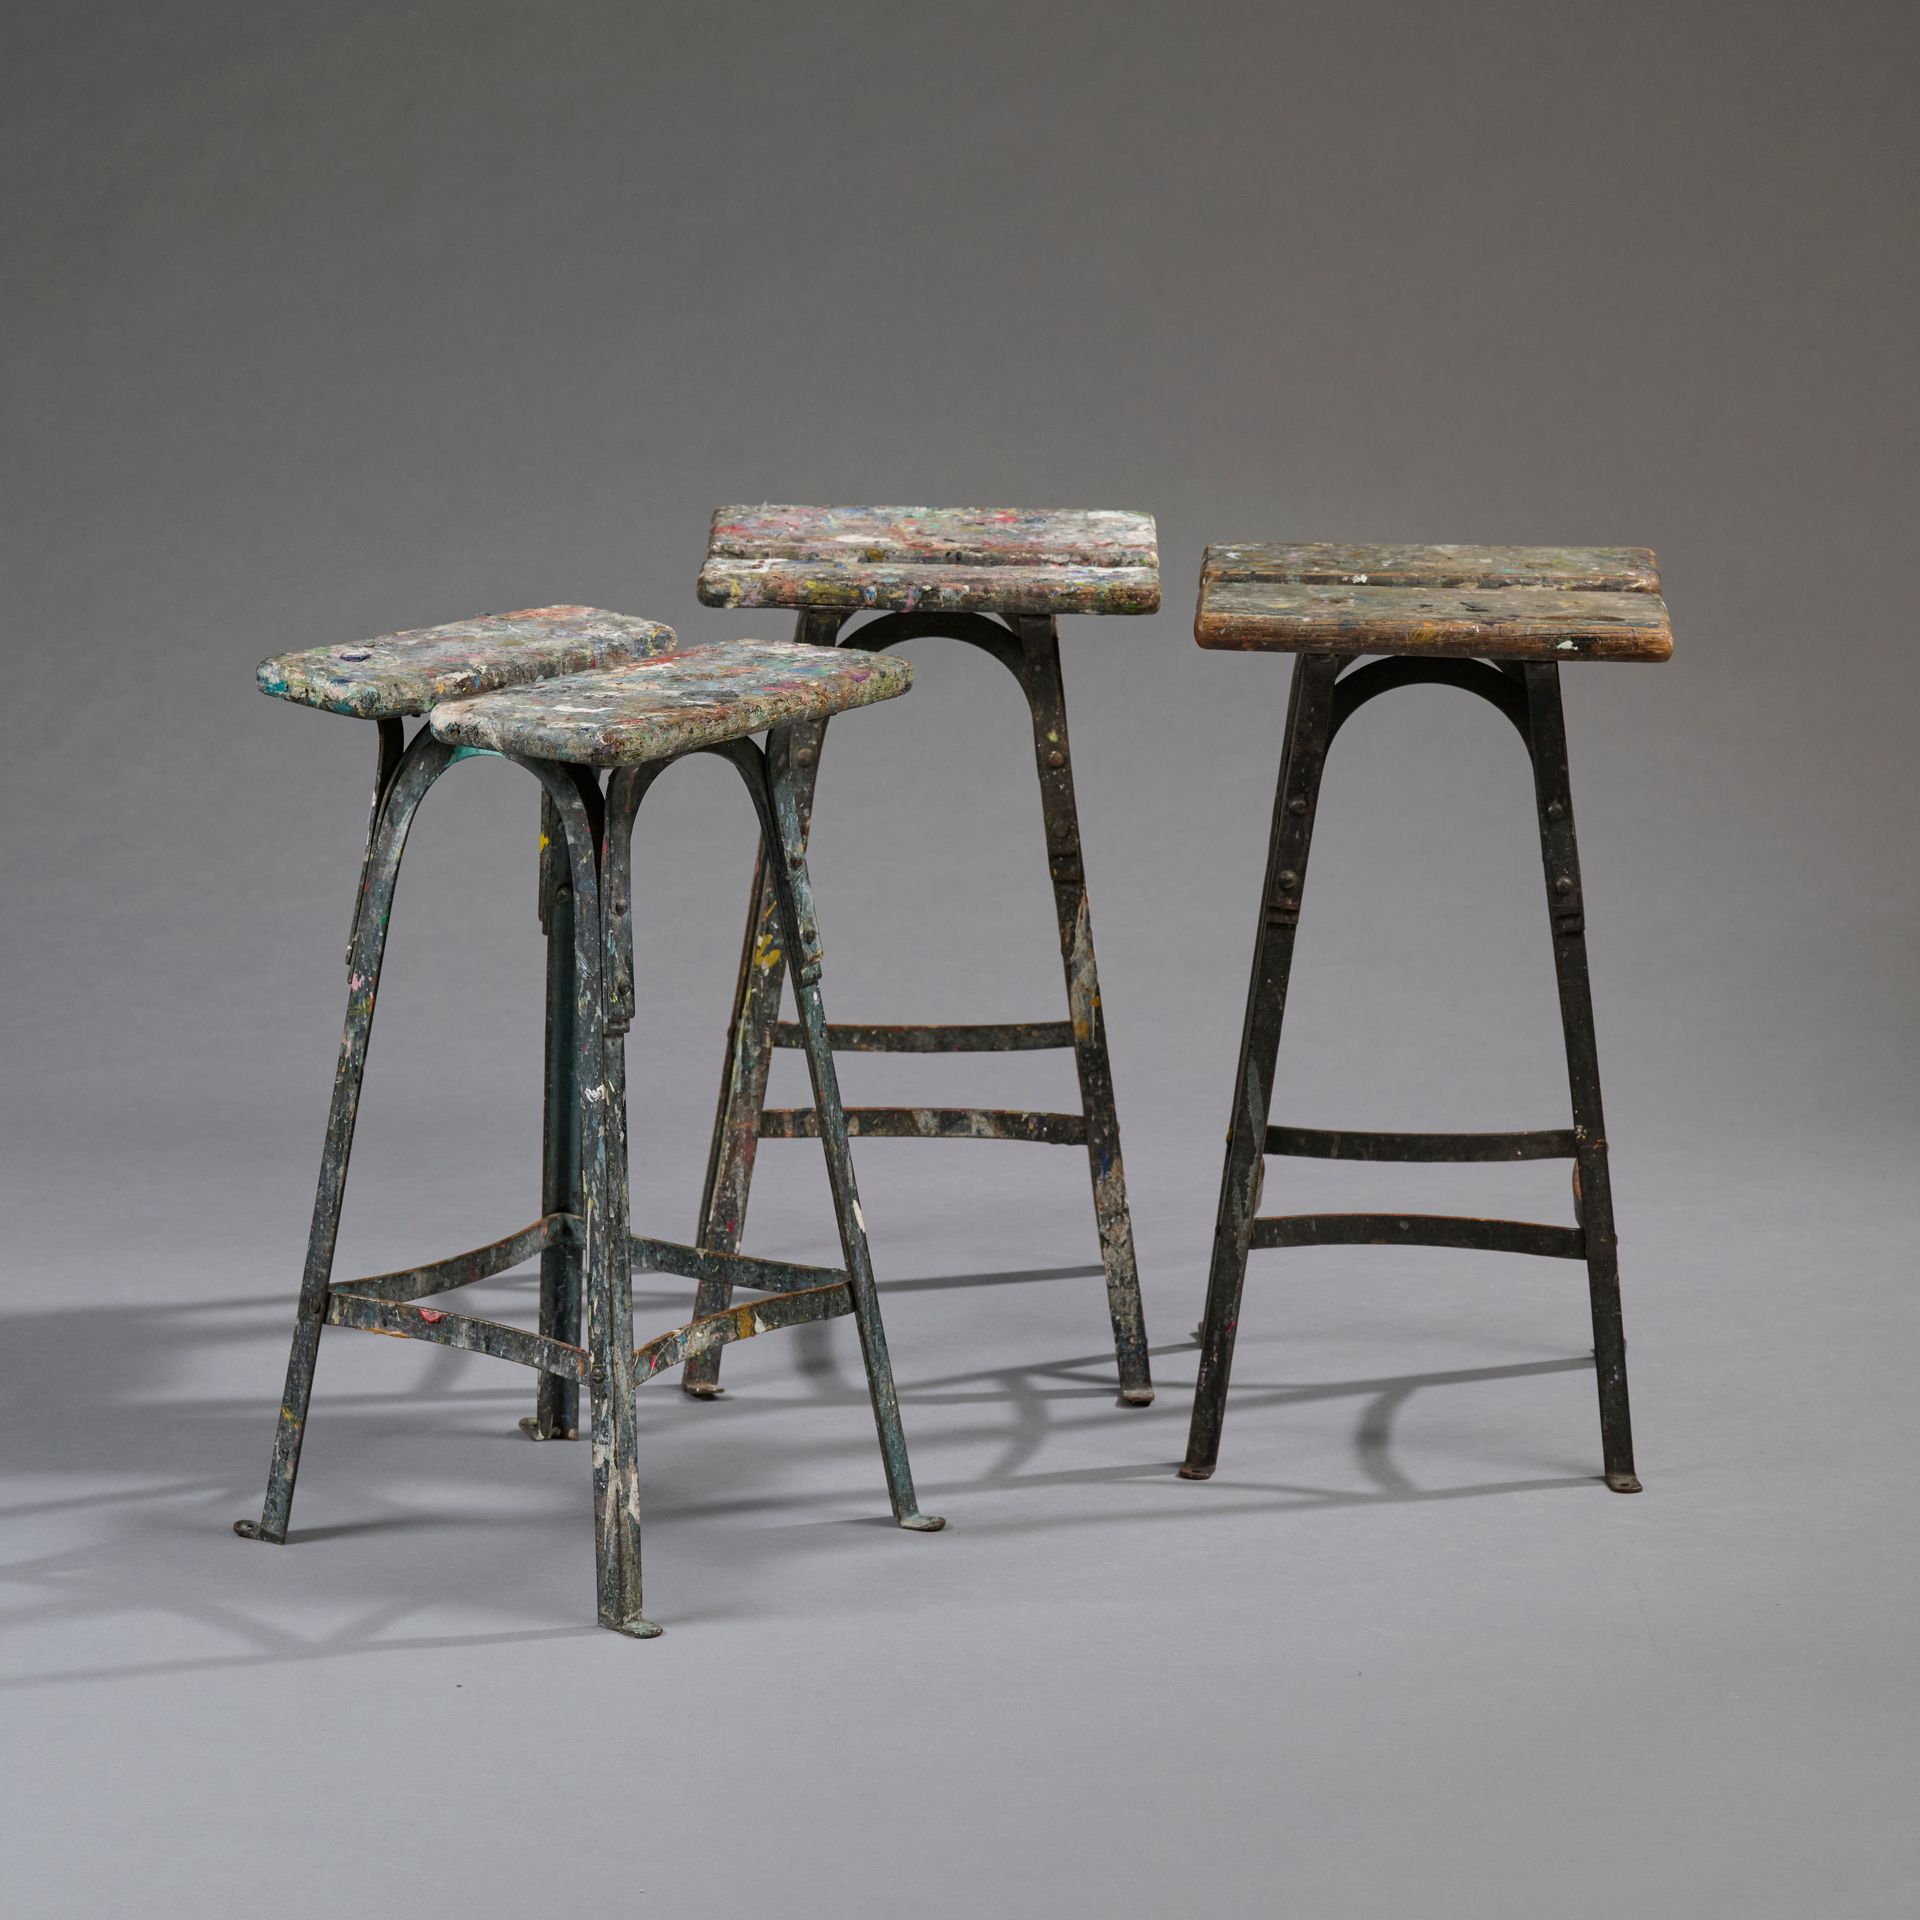 Null Suite of three workshop stools, seat composed of two wooden planks joined a&hellip;